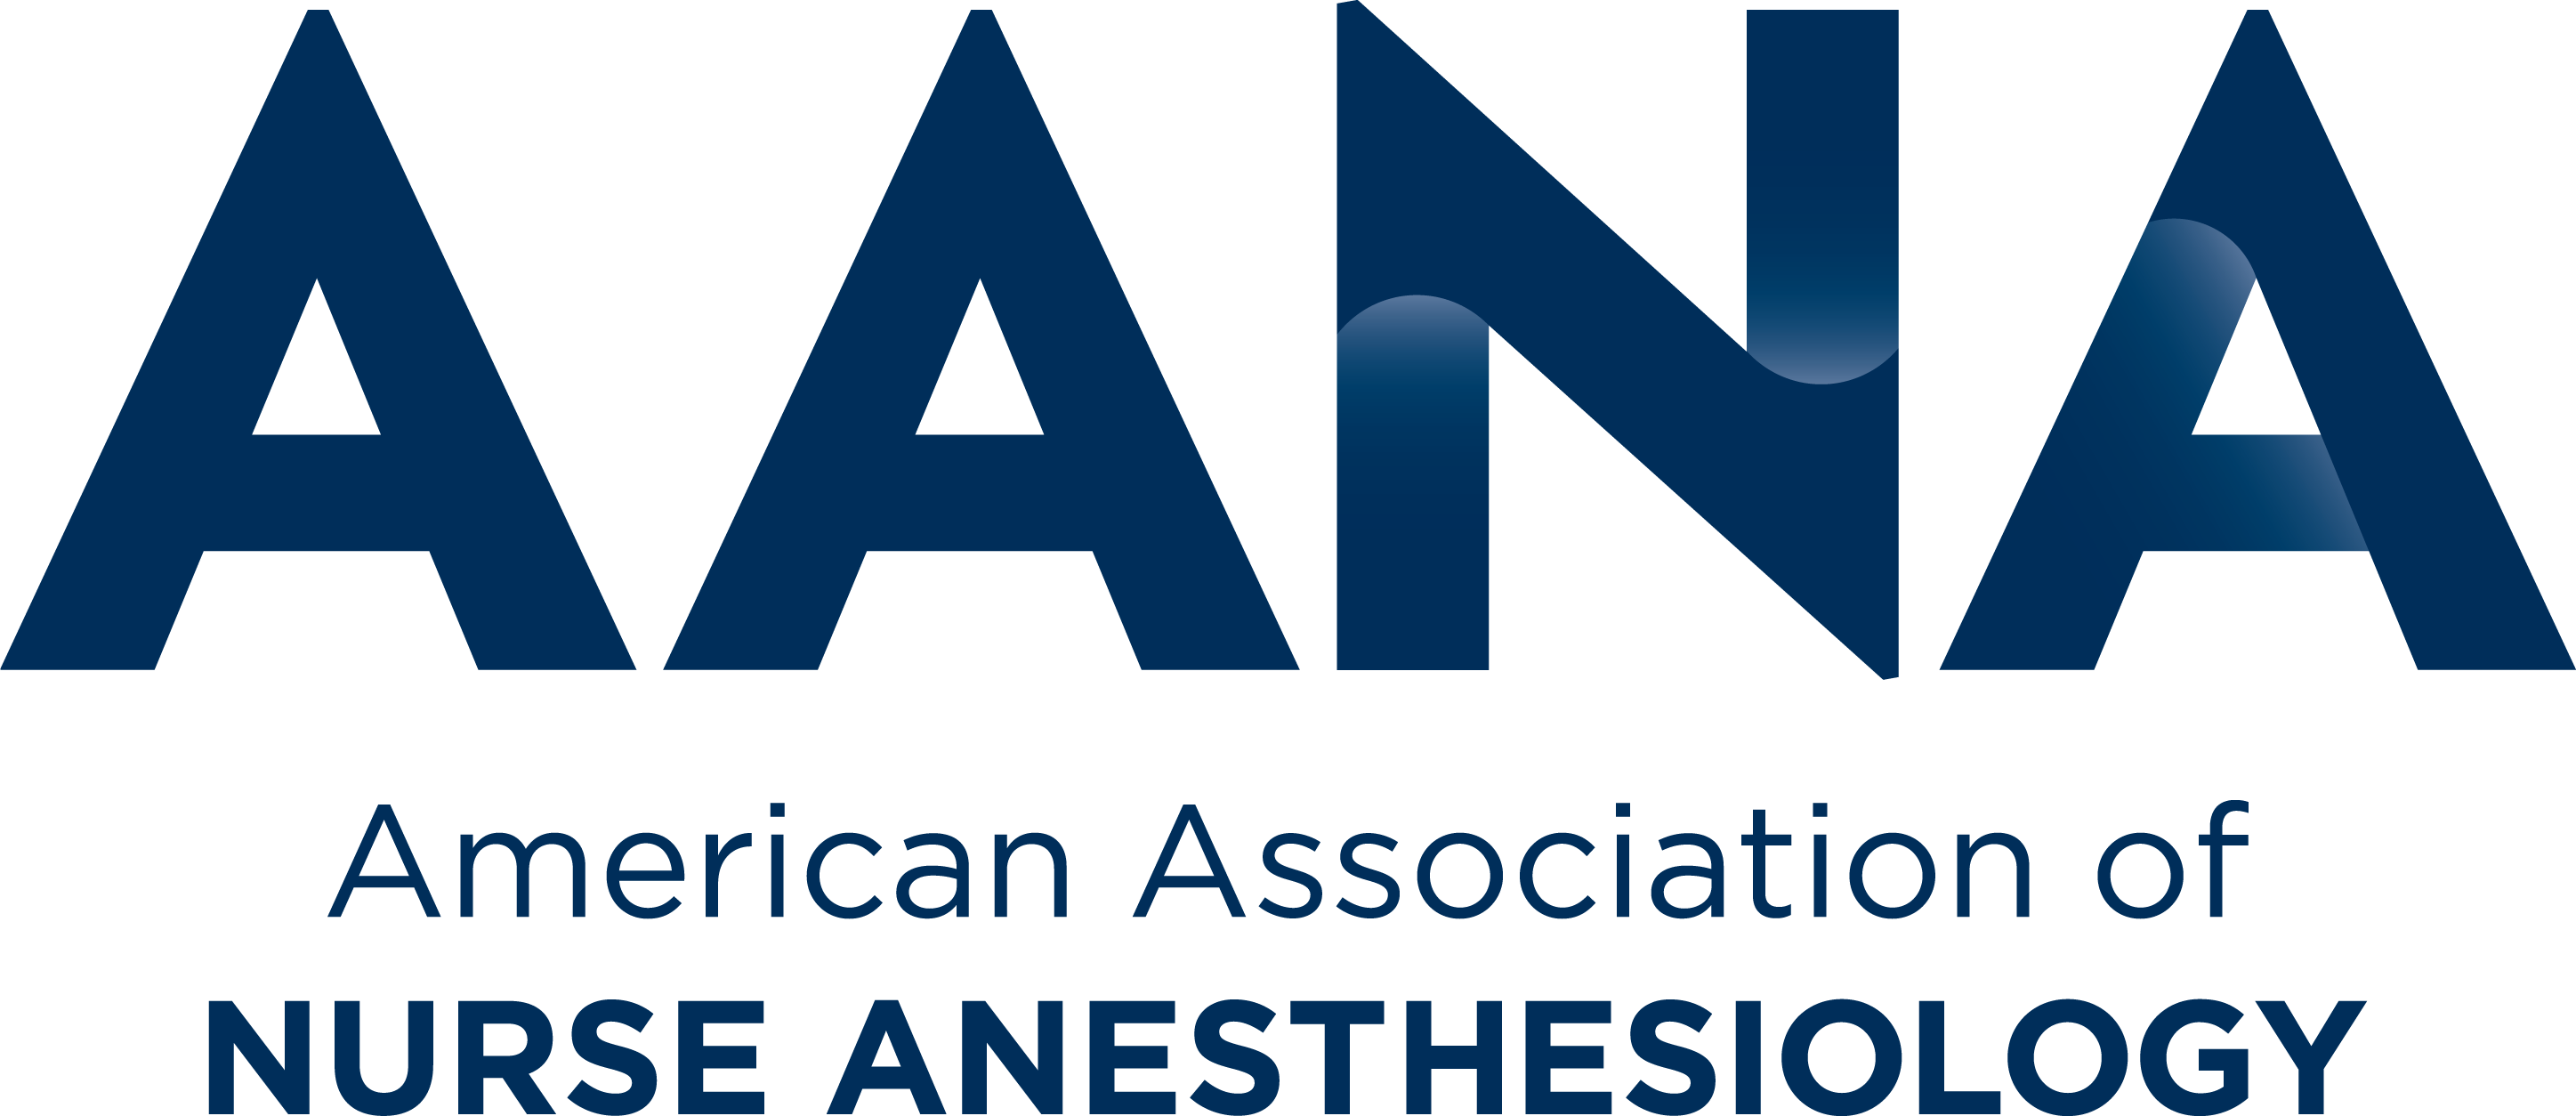 AANA-logo-stacked-full color